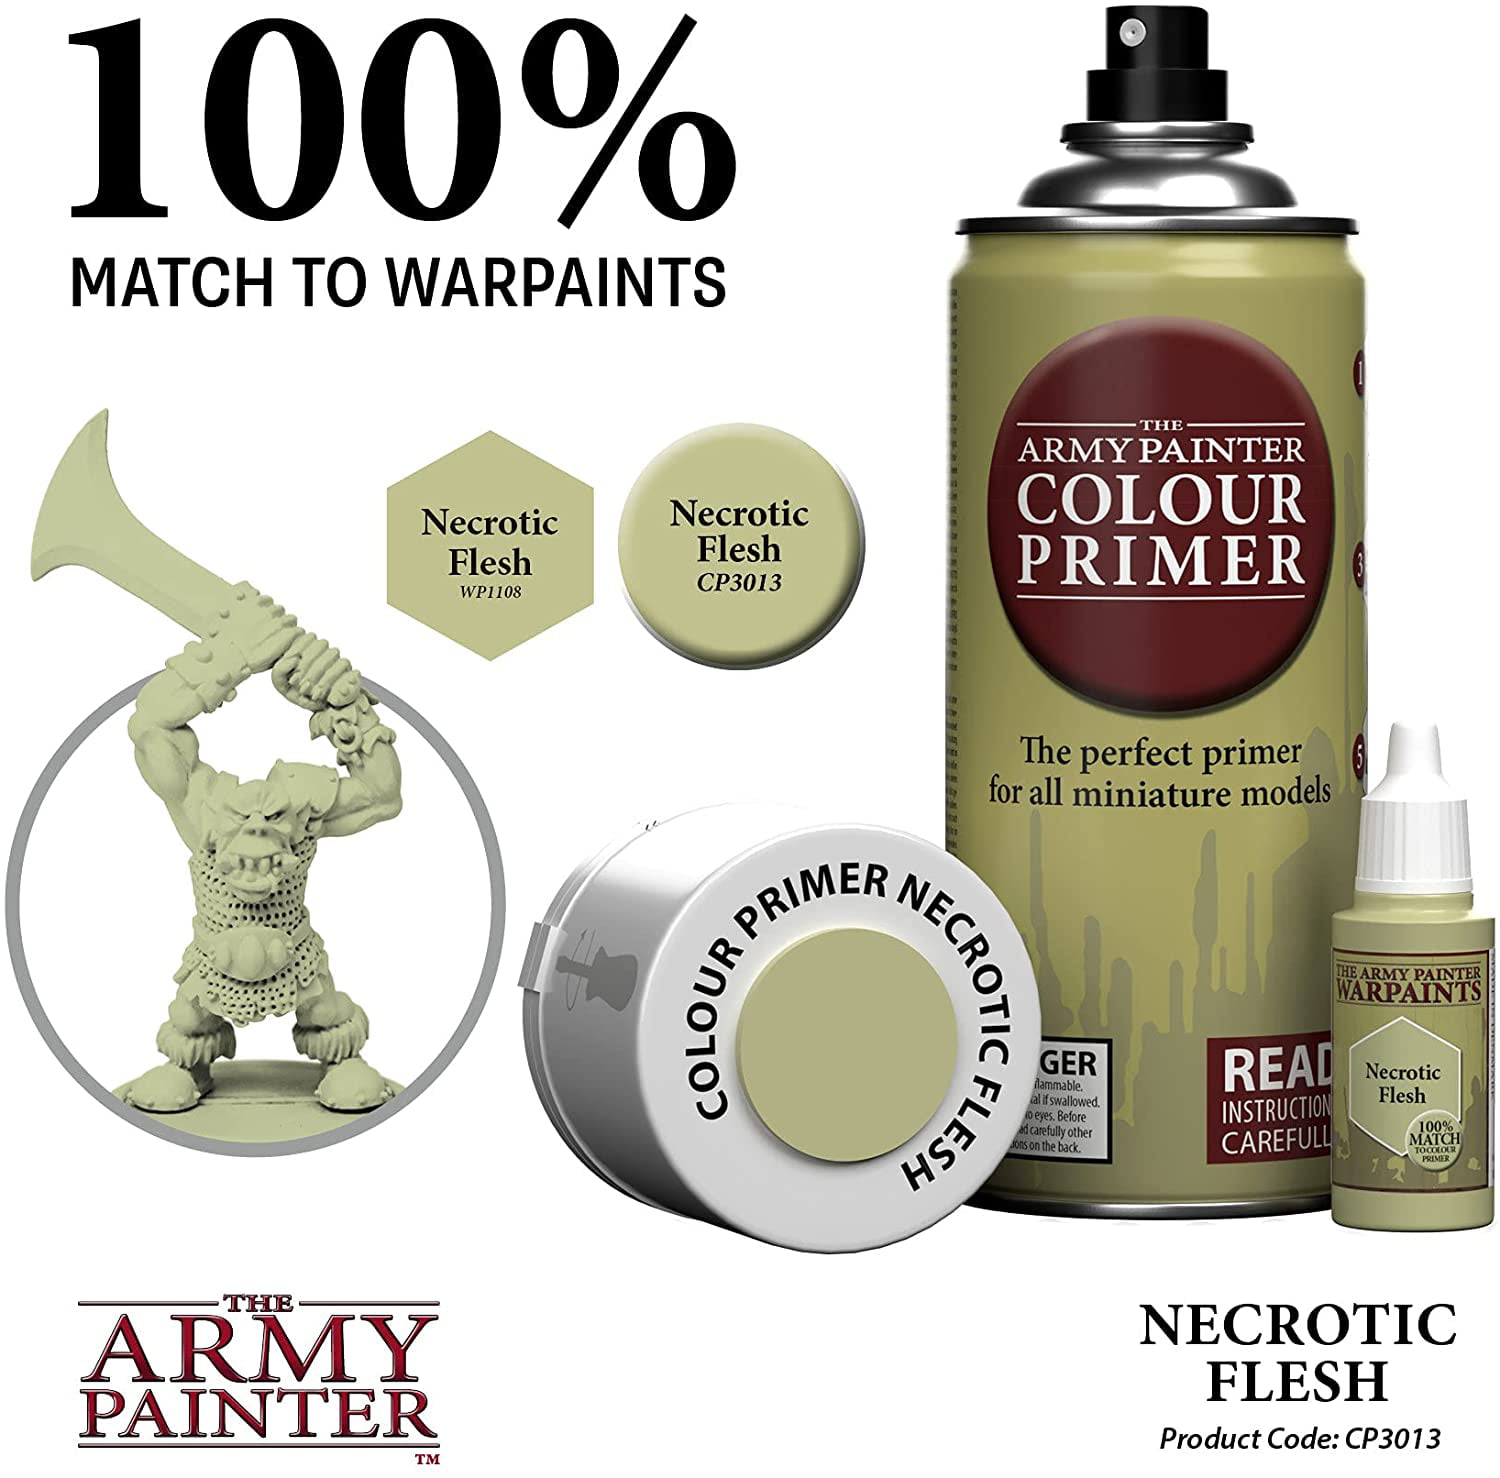 The Army Painter Army Painter - Primer Angel Green Spray - Jeux de